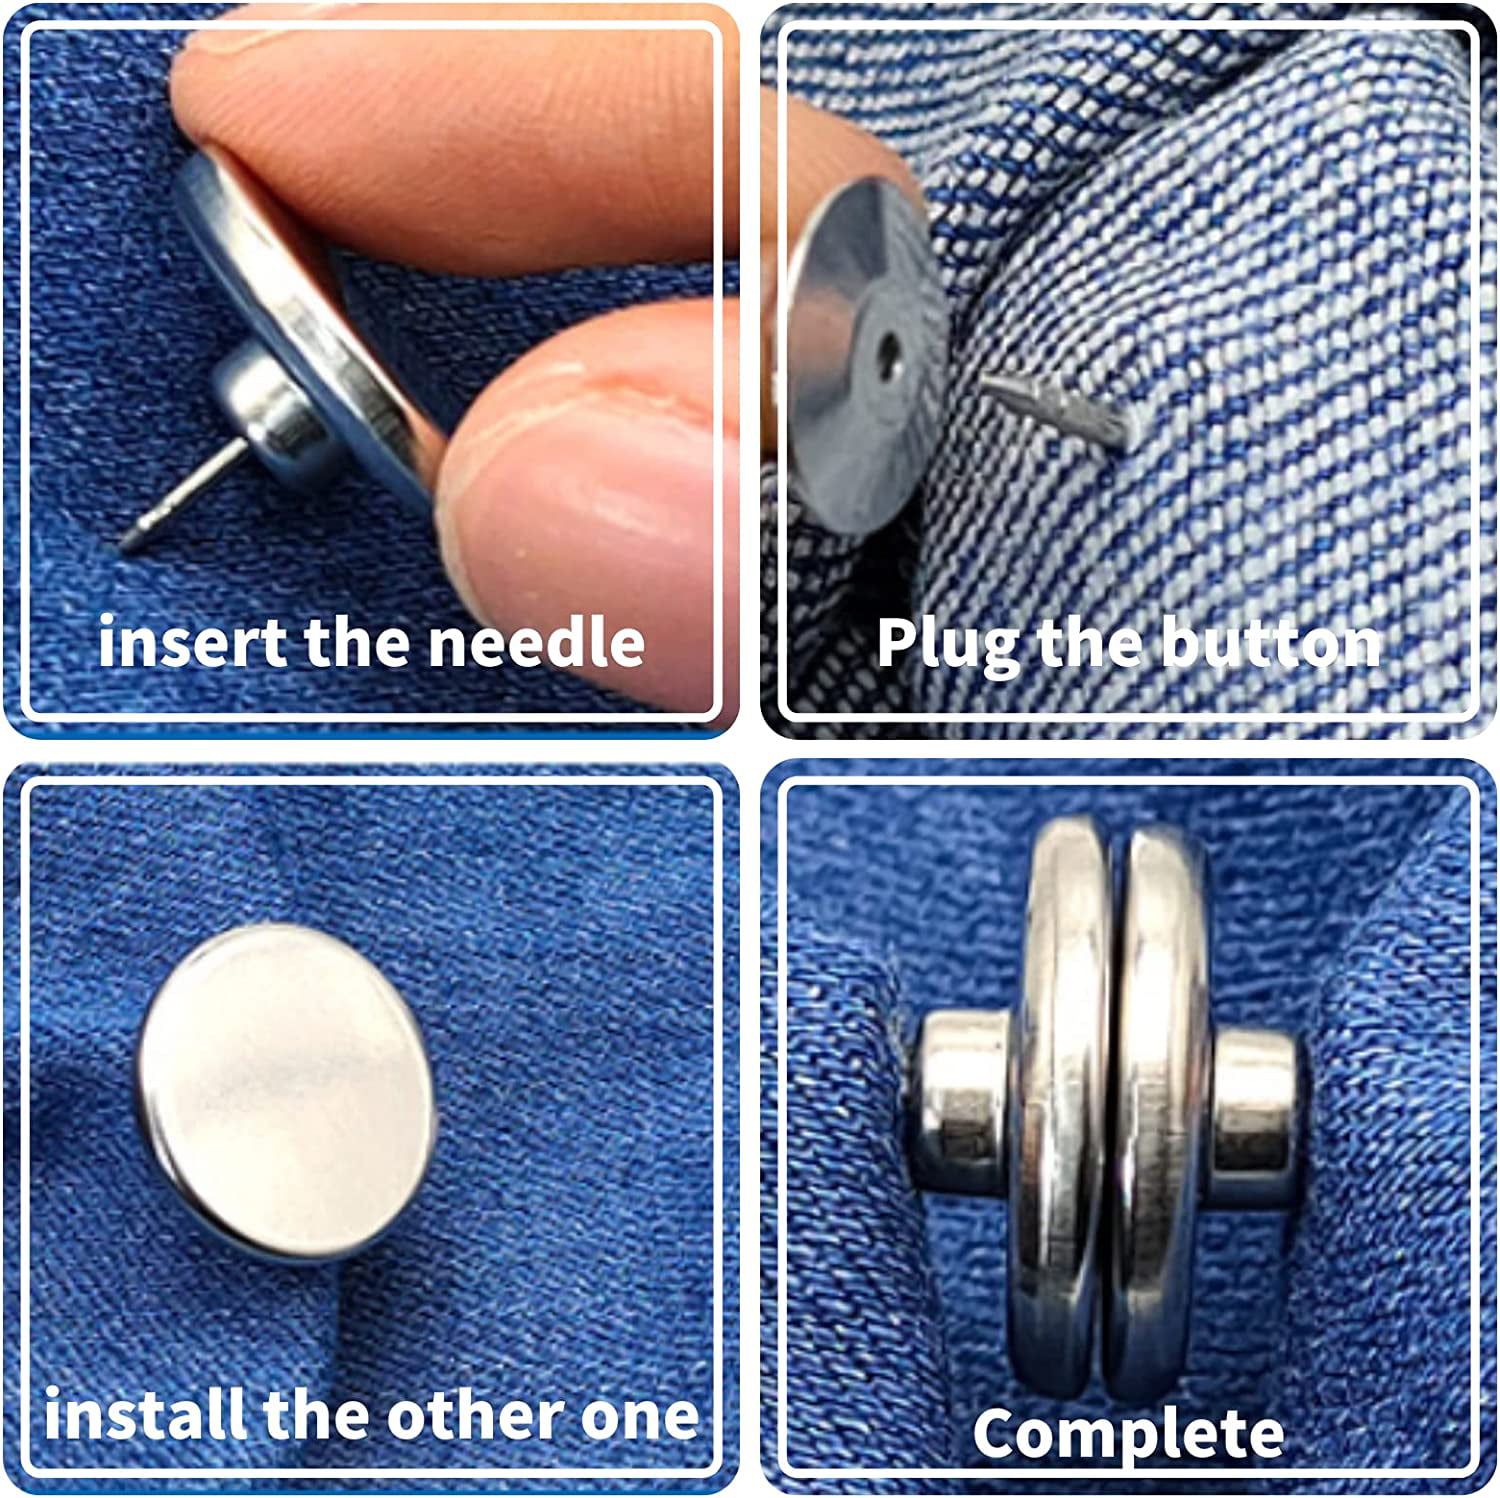 Curtain Magnets Closure Curtain Accessories Curtain Magnetic Holdback  Button Free Punching Magnet Buckle,Keep Curtain Liners Closed&Tight To Side  Walls